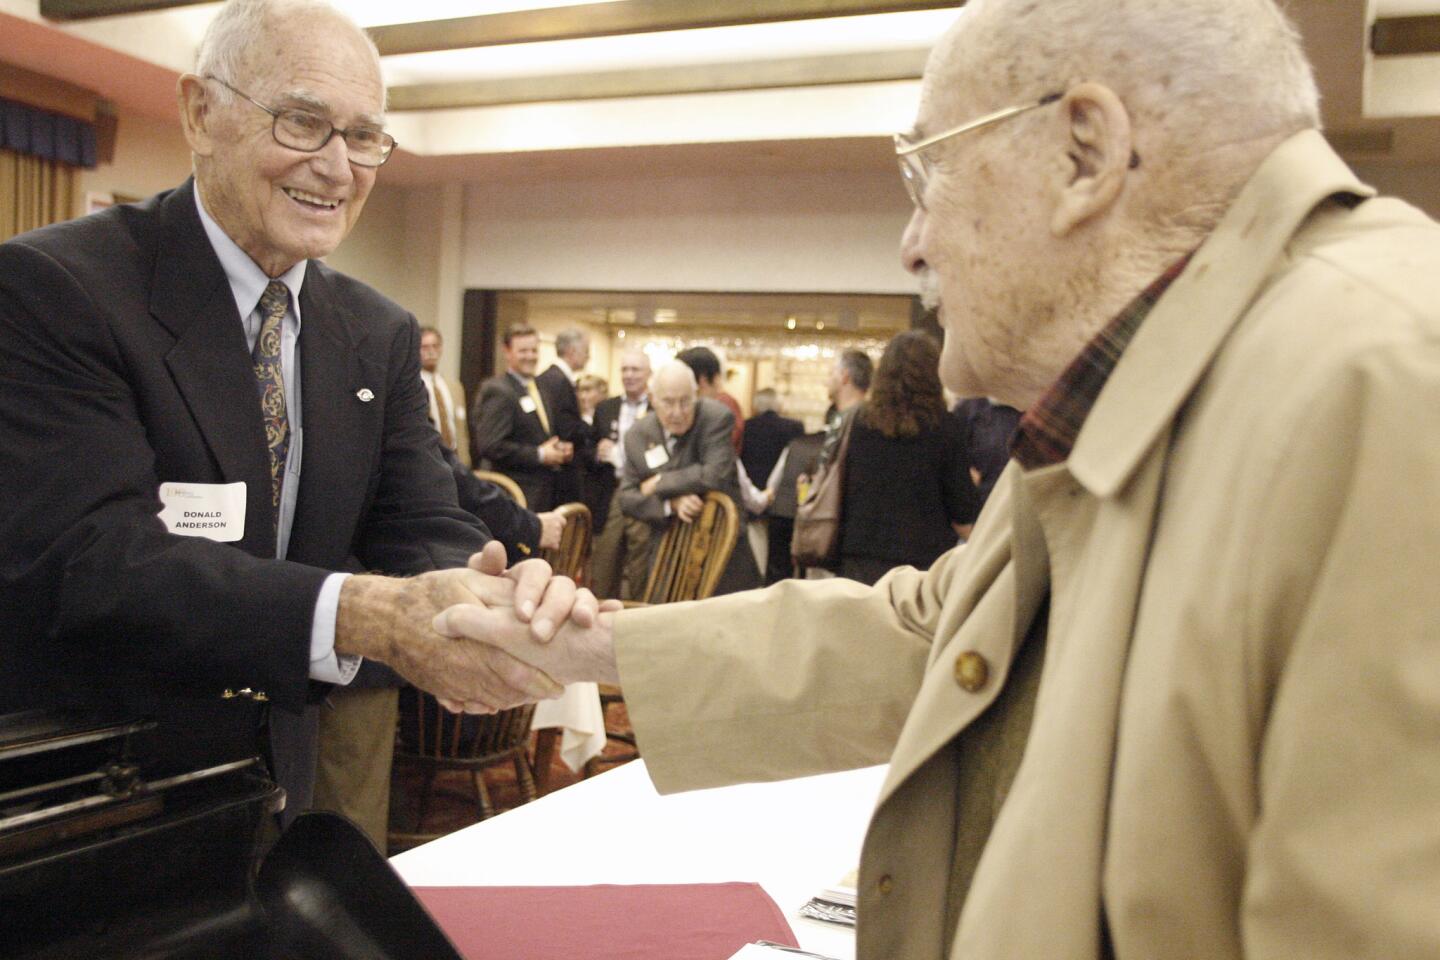 Co-owner of Anderson Business Technologies Don Anderson, left, shakes Bob Hemmings' hand during his 100th anniversary celebration, which took placeat the University Club of Pasadena on Thursday, October 11, 2012.